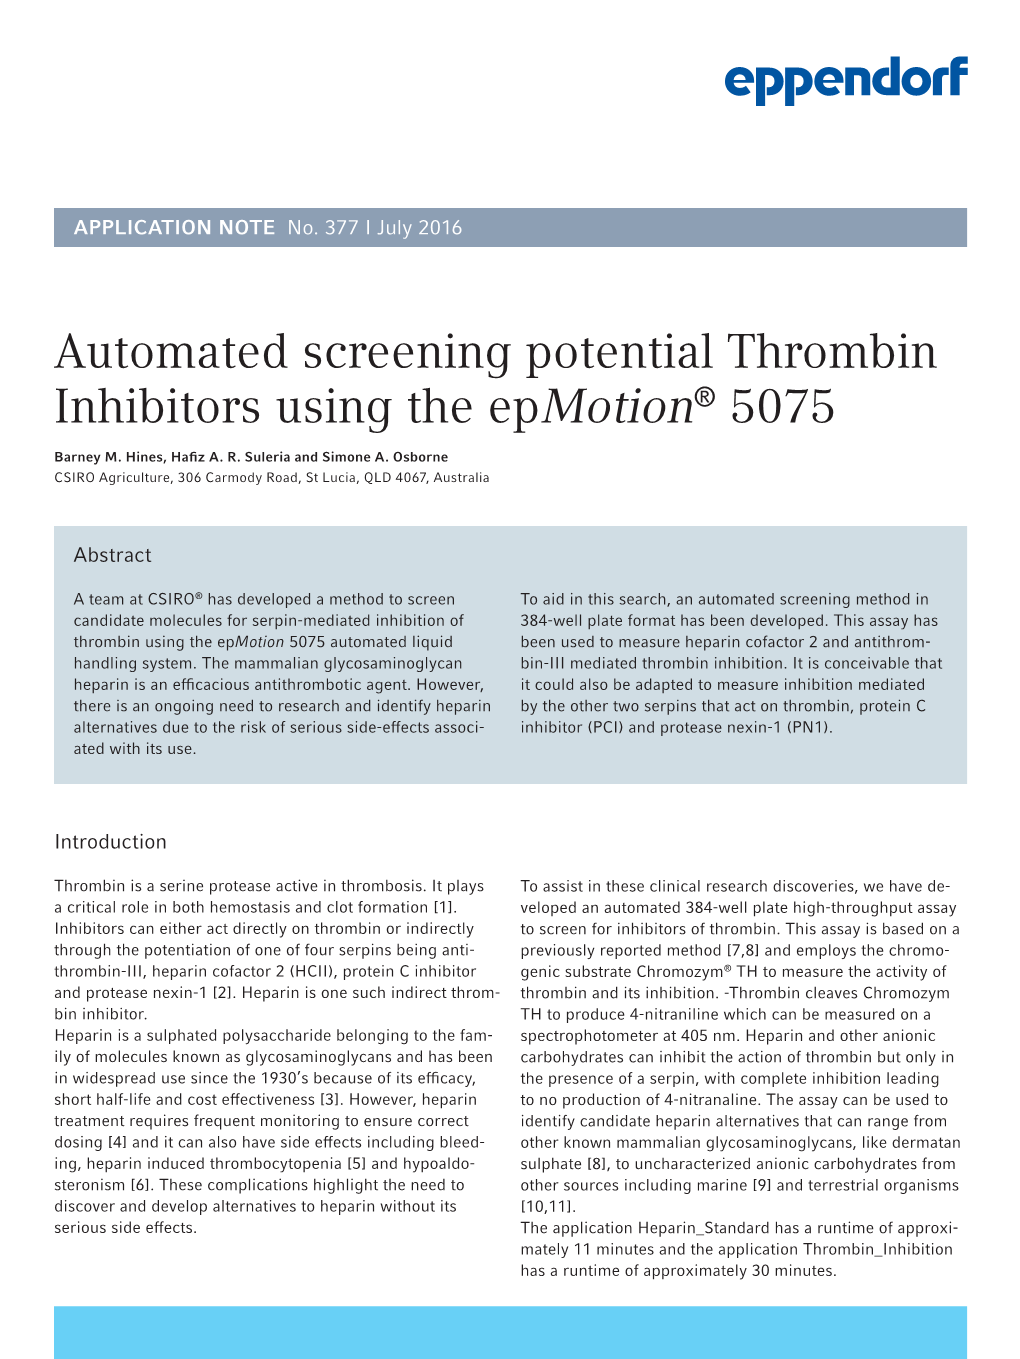 Automated Screening Potential Thrombin Inhibitors Using the Epmotion® 5075